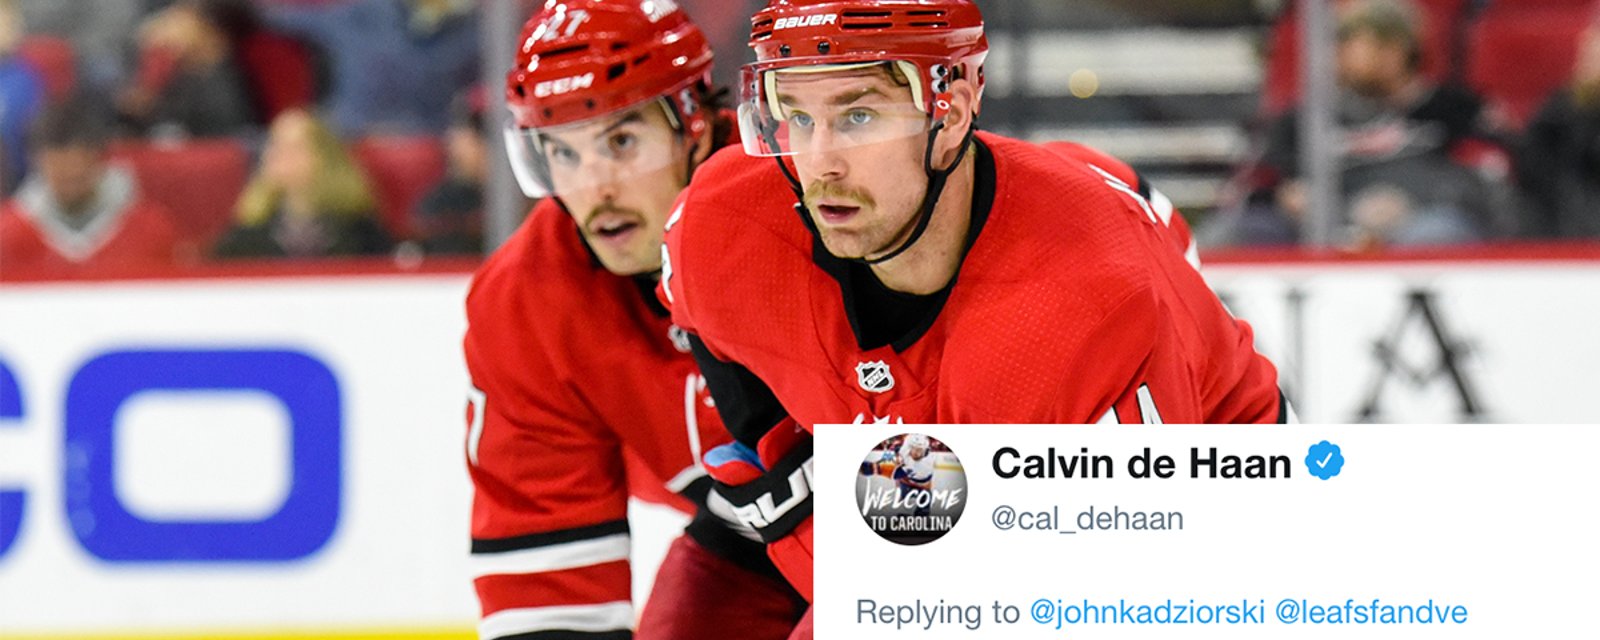 Hurricanes Dman De Haan responds to fan who tagged him in a Leafs trade proposal